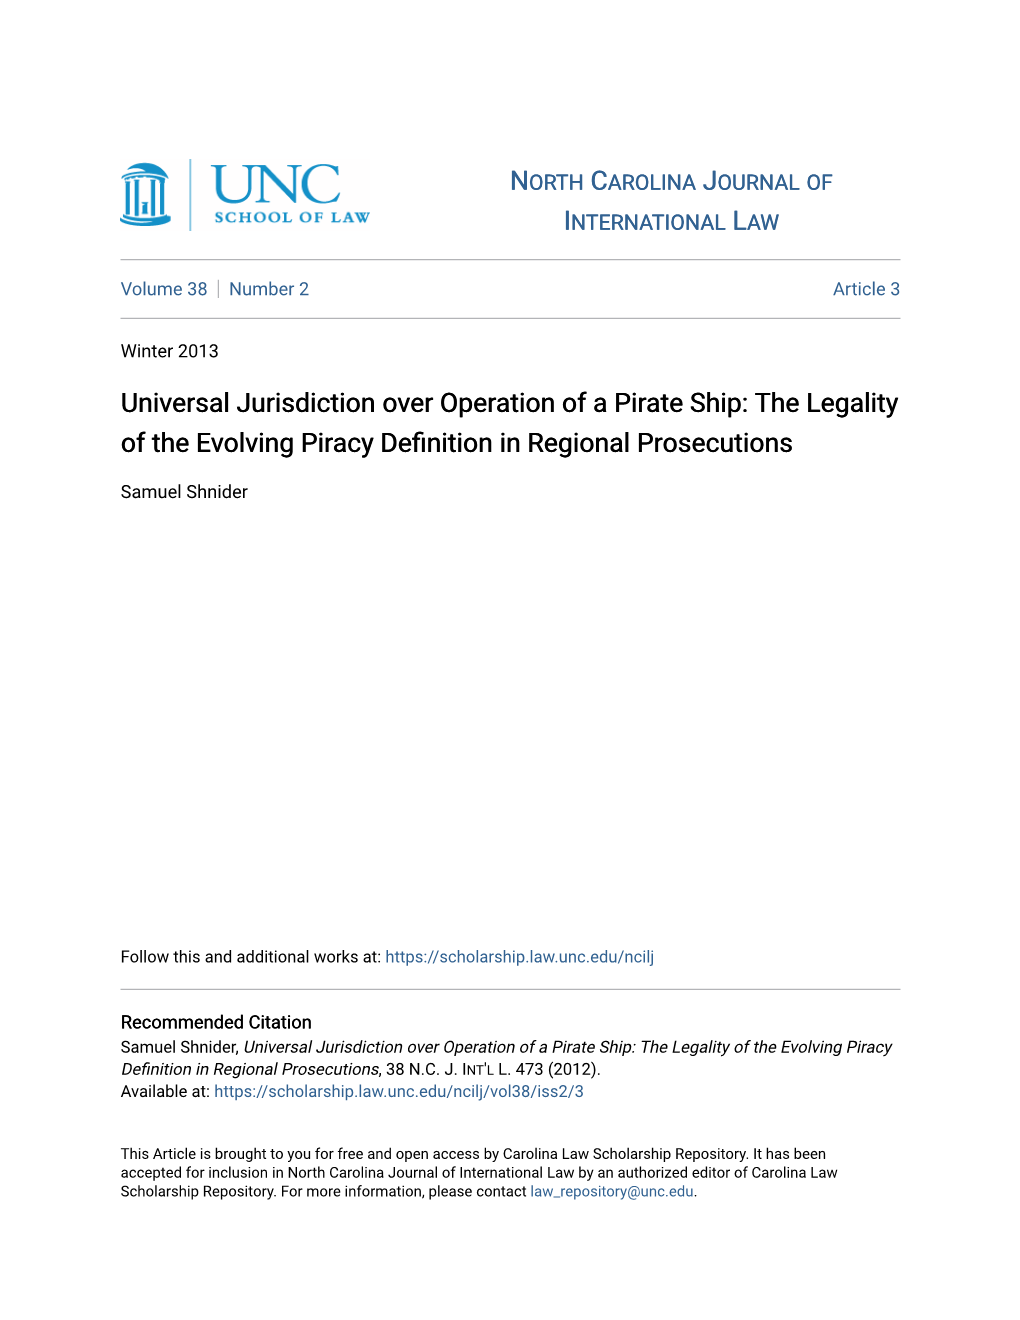 Universal Jurisdiction Over Operation of a Pirate Ship: the Legality of the Evolving Piracy Definition in Regional Prosecutions